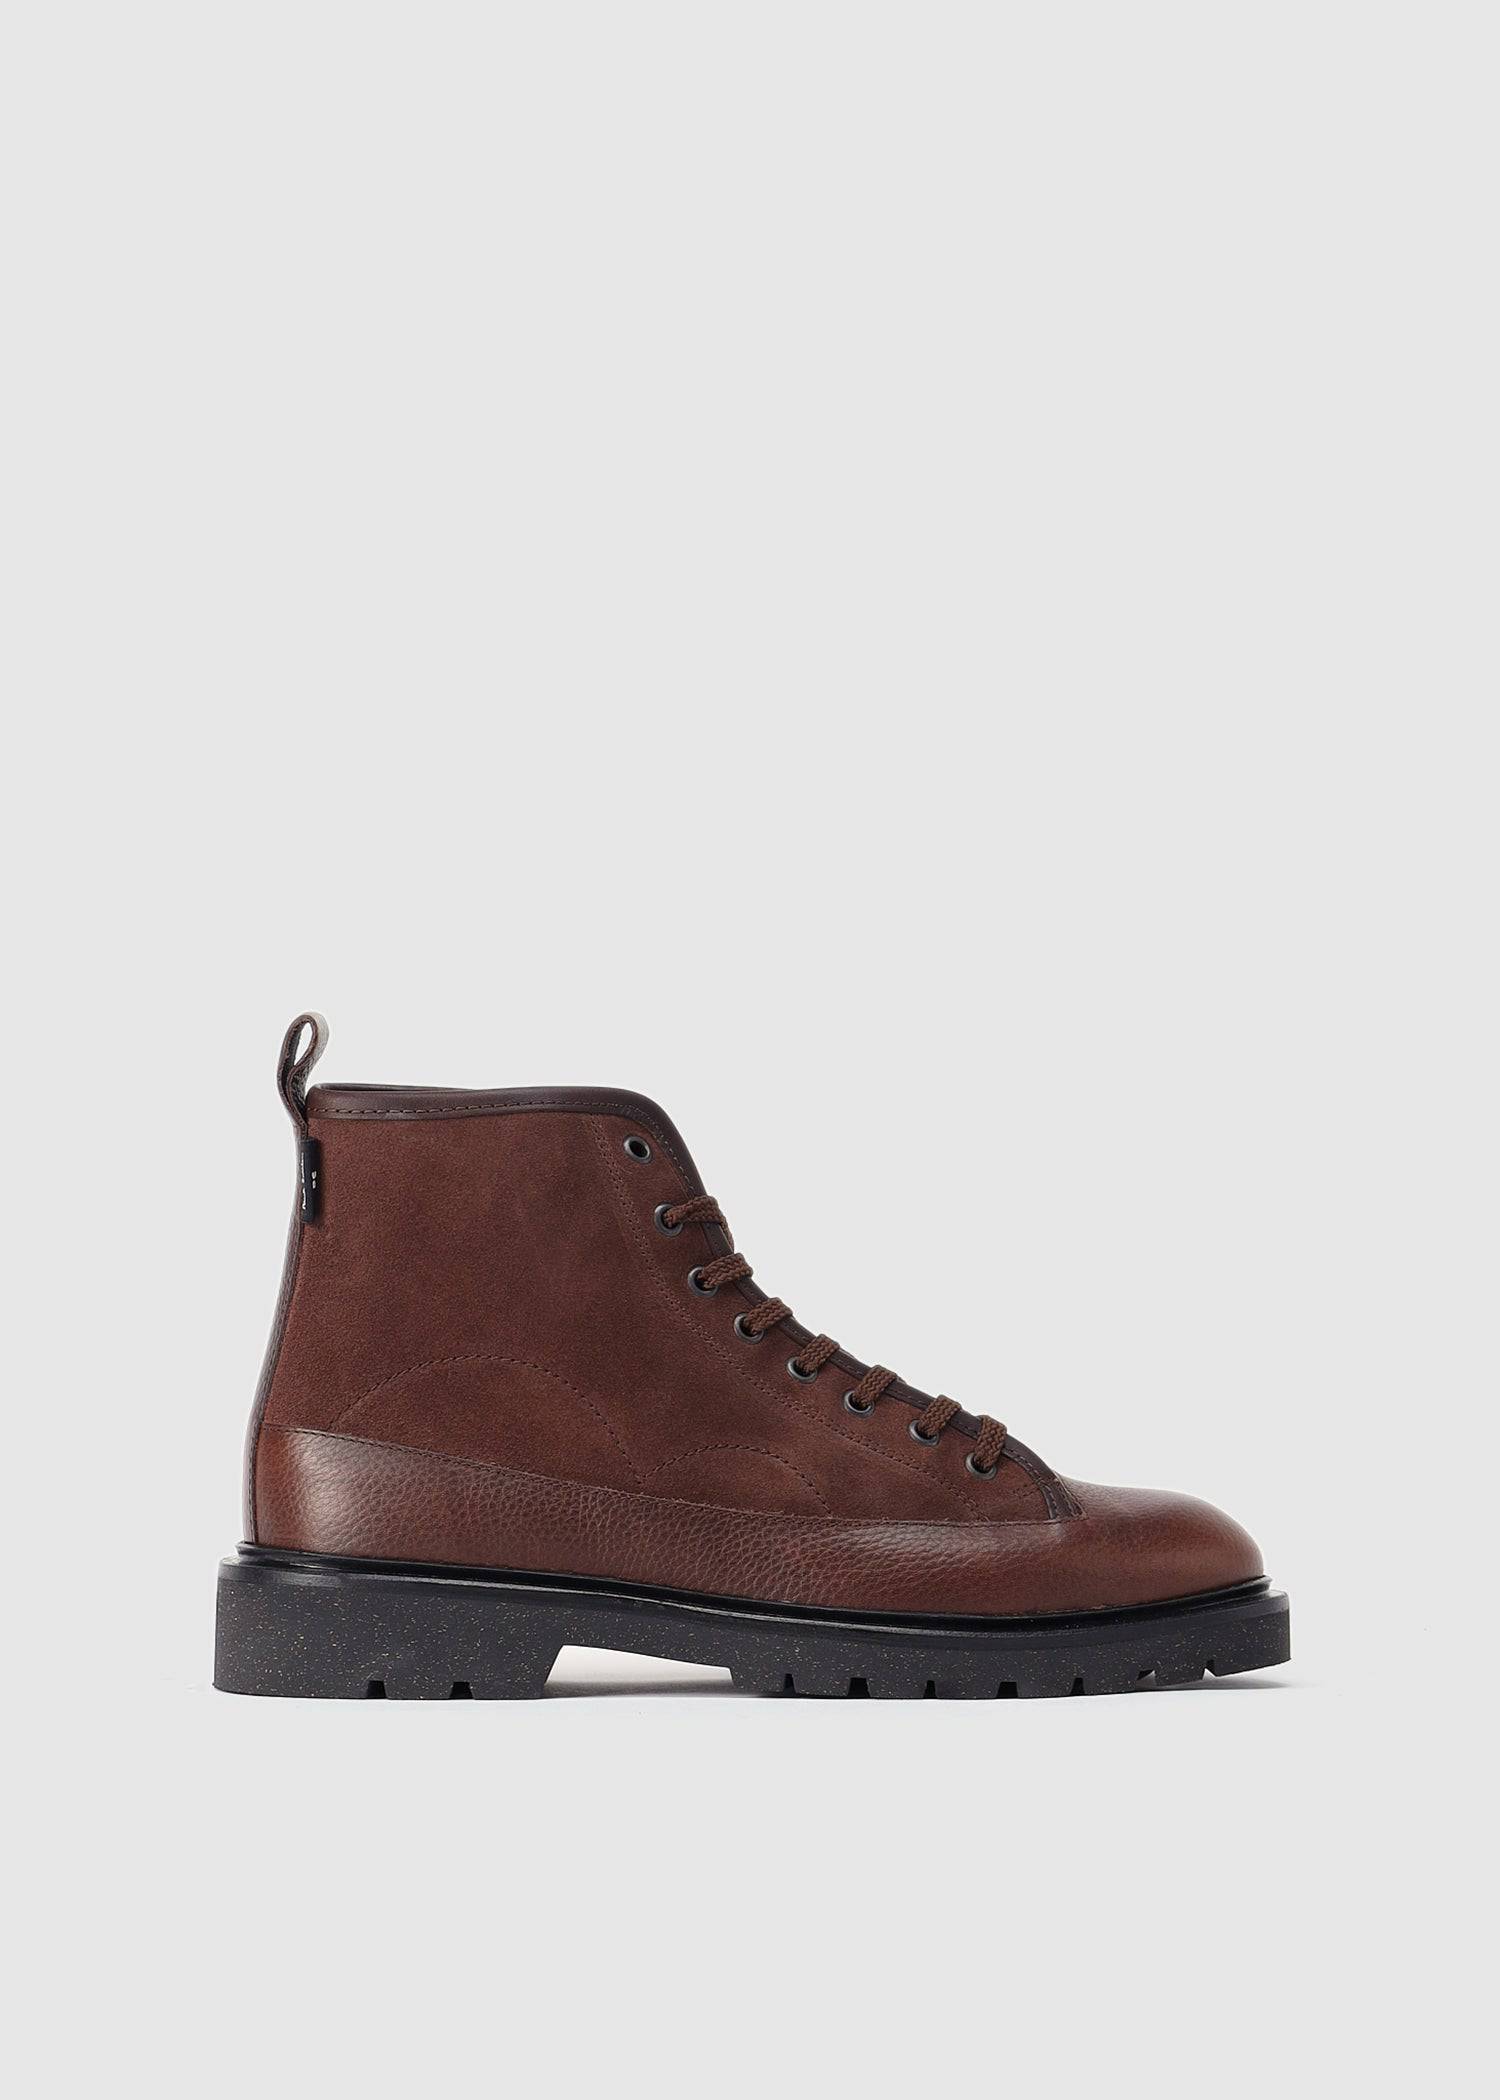 Image of Paul Smith Mens BuhIl Boots In Chocolate